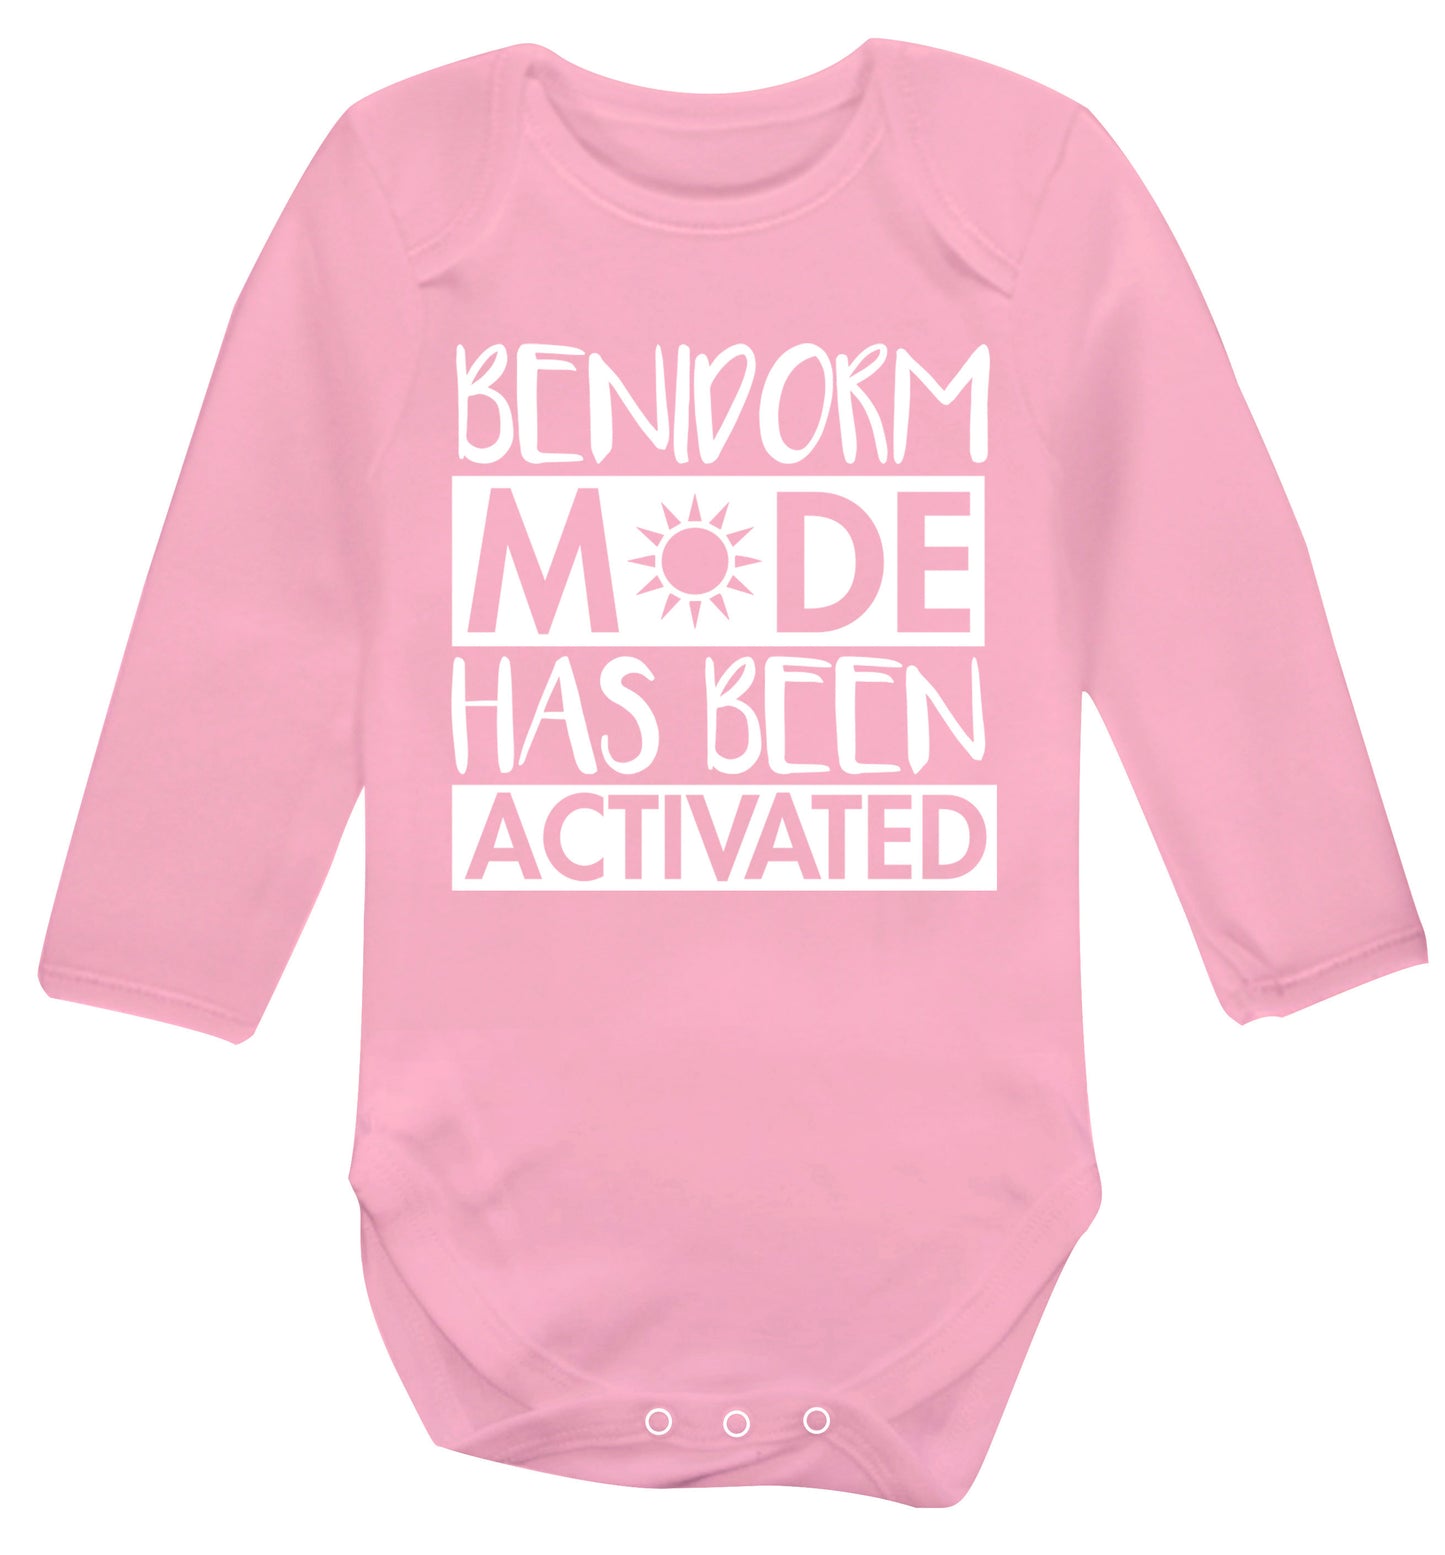 Benidorm mode has been activated Baby Vest long sleeved pale pink 6-12 months